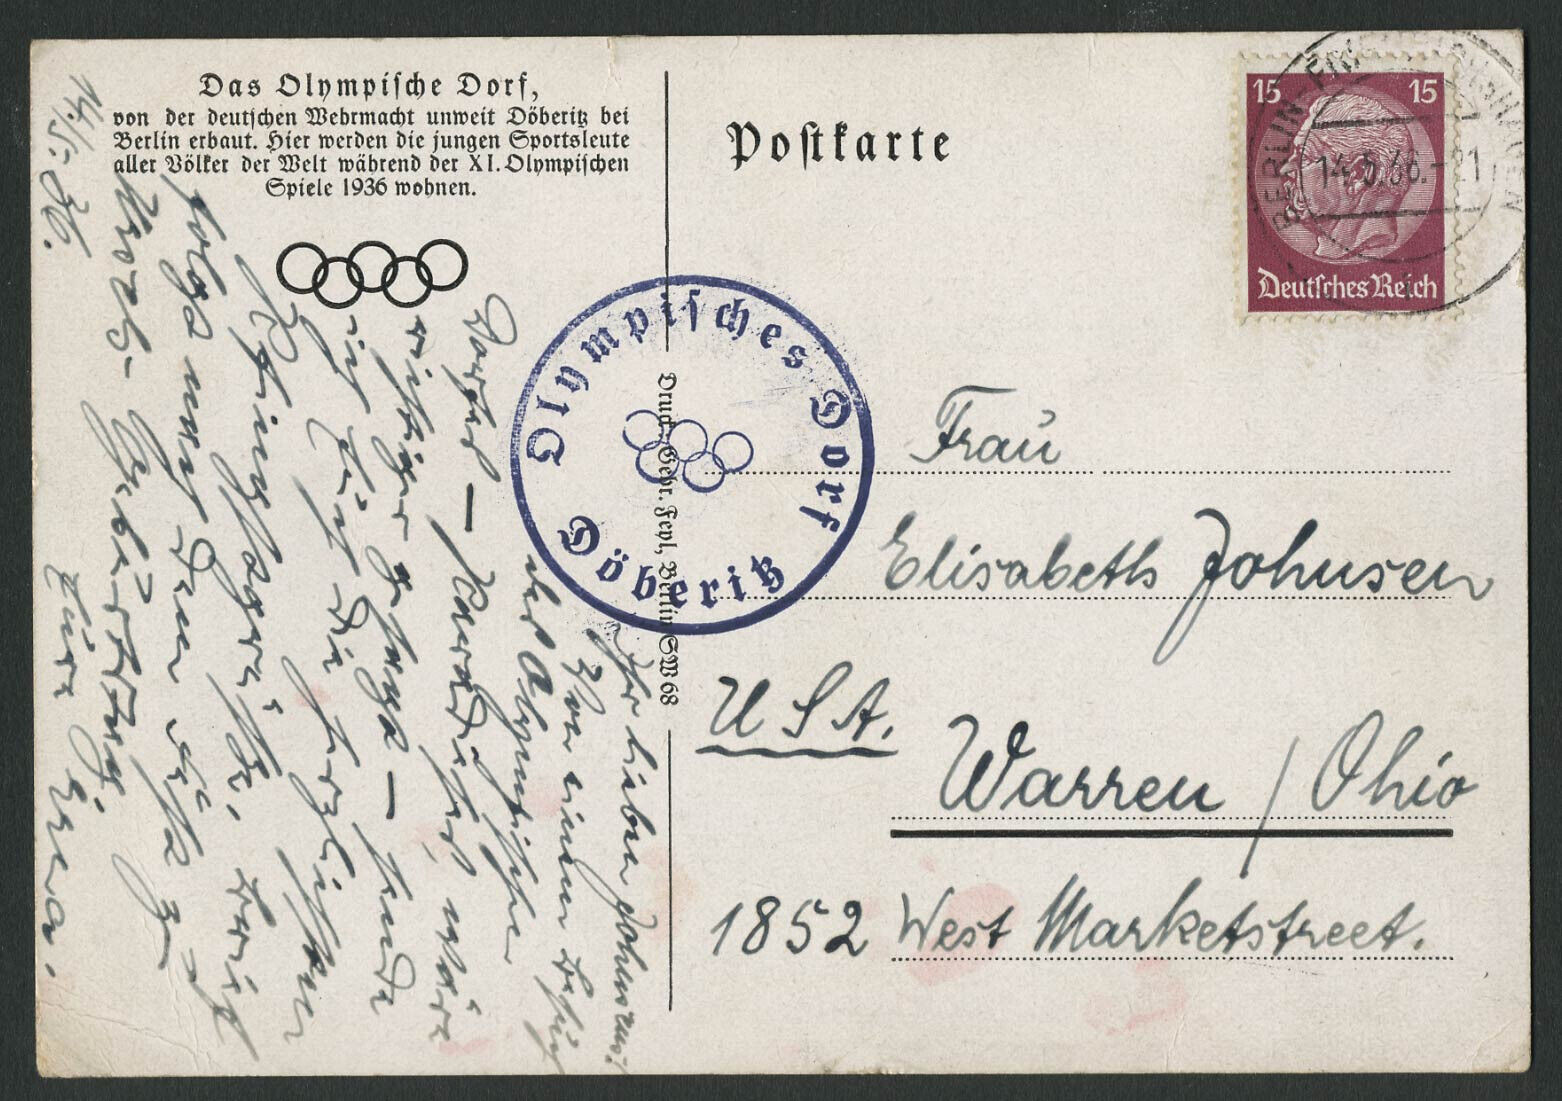 1936 Germany Olympics OLYMPISCHES DORF Official Postcard Mailed May 14th to USA